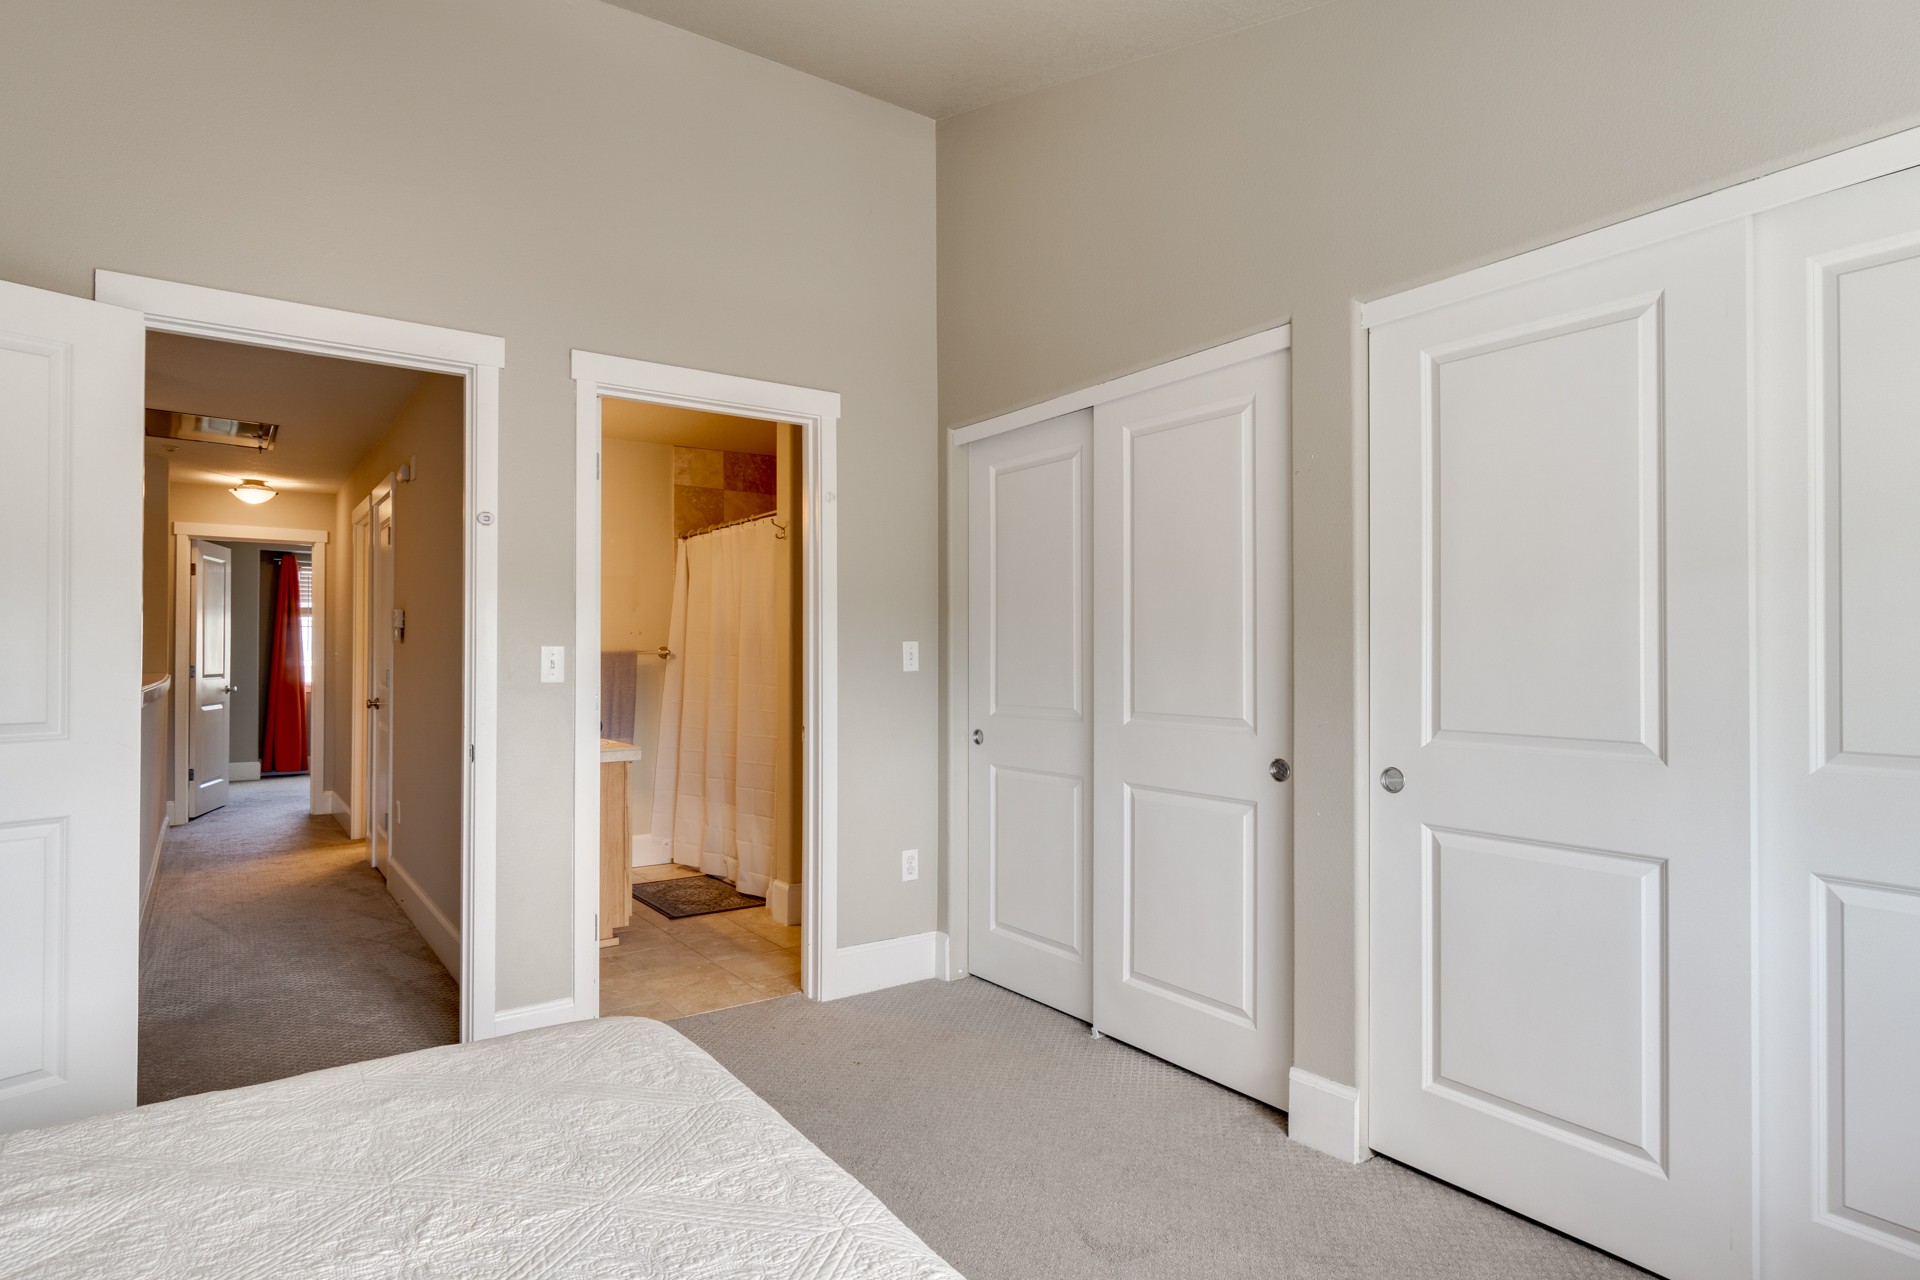 Owner's Suite with double closets and an attached bathroom